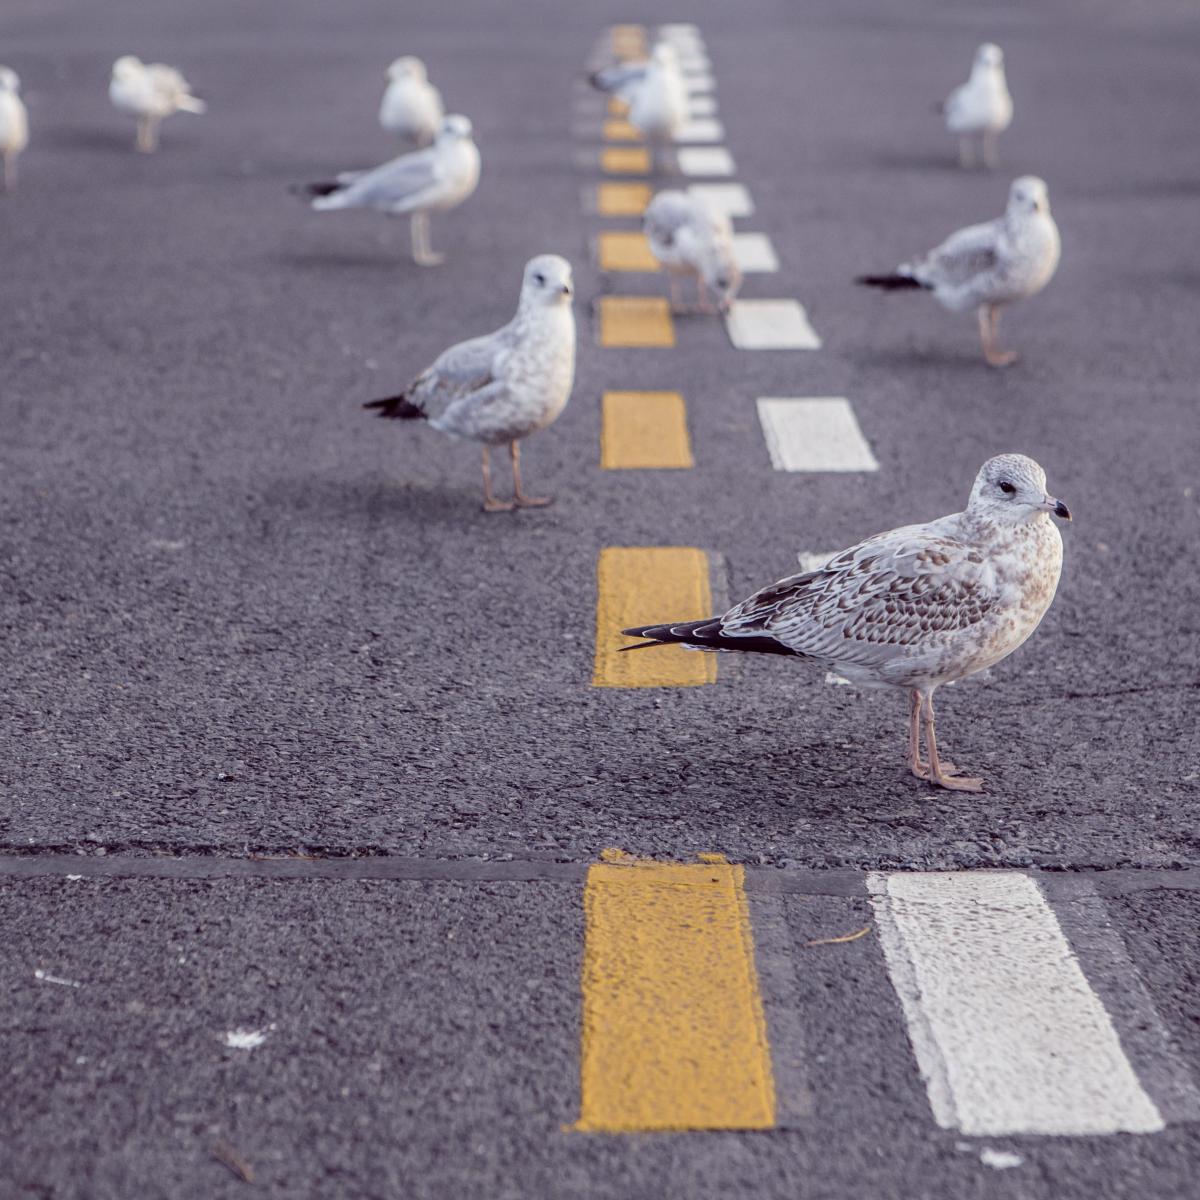 Seagulls on a street with yellow and white dotted lane dividers. Stock photo courtesy of Gratisography.com